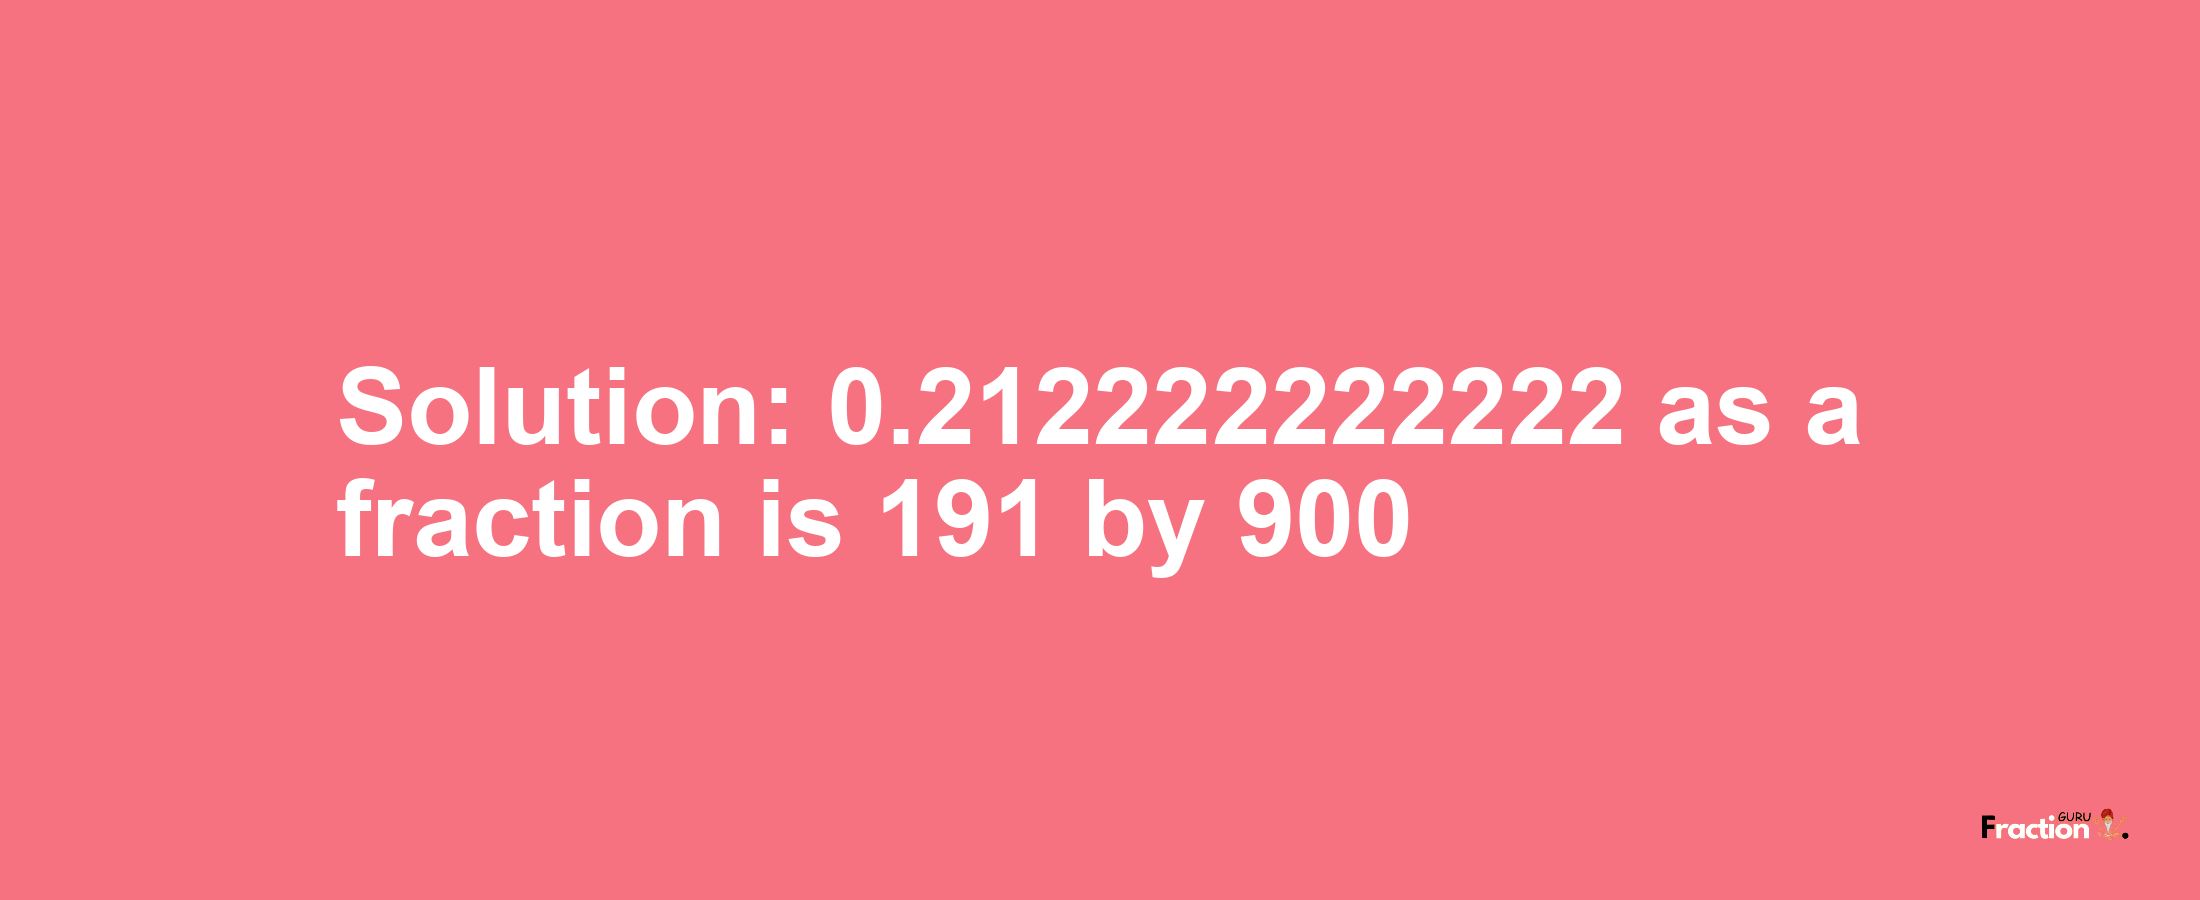 Solution:0.212222222222 as a fraction is 191/900